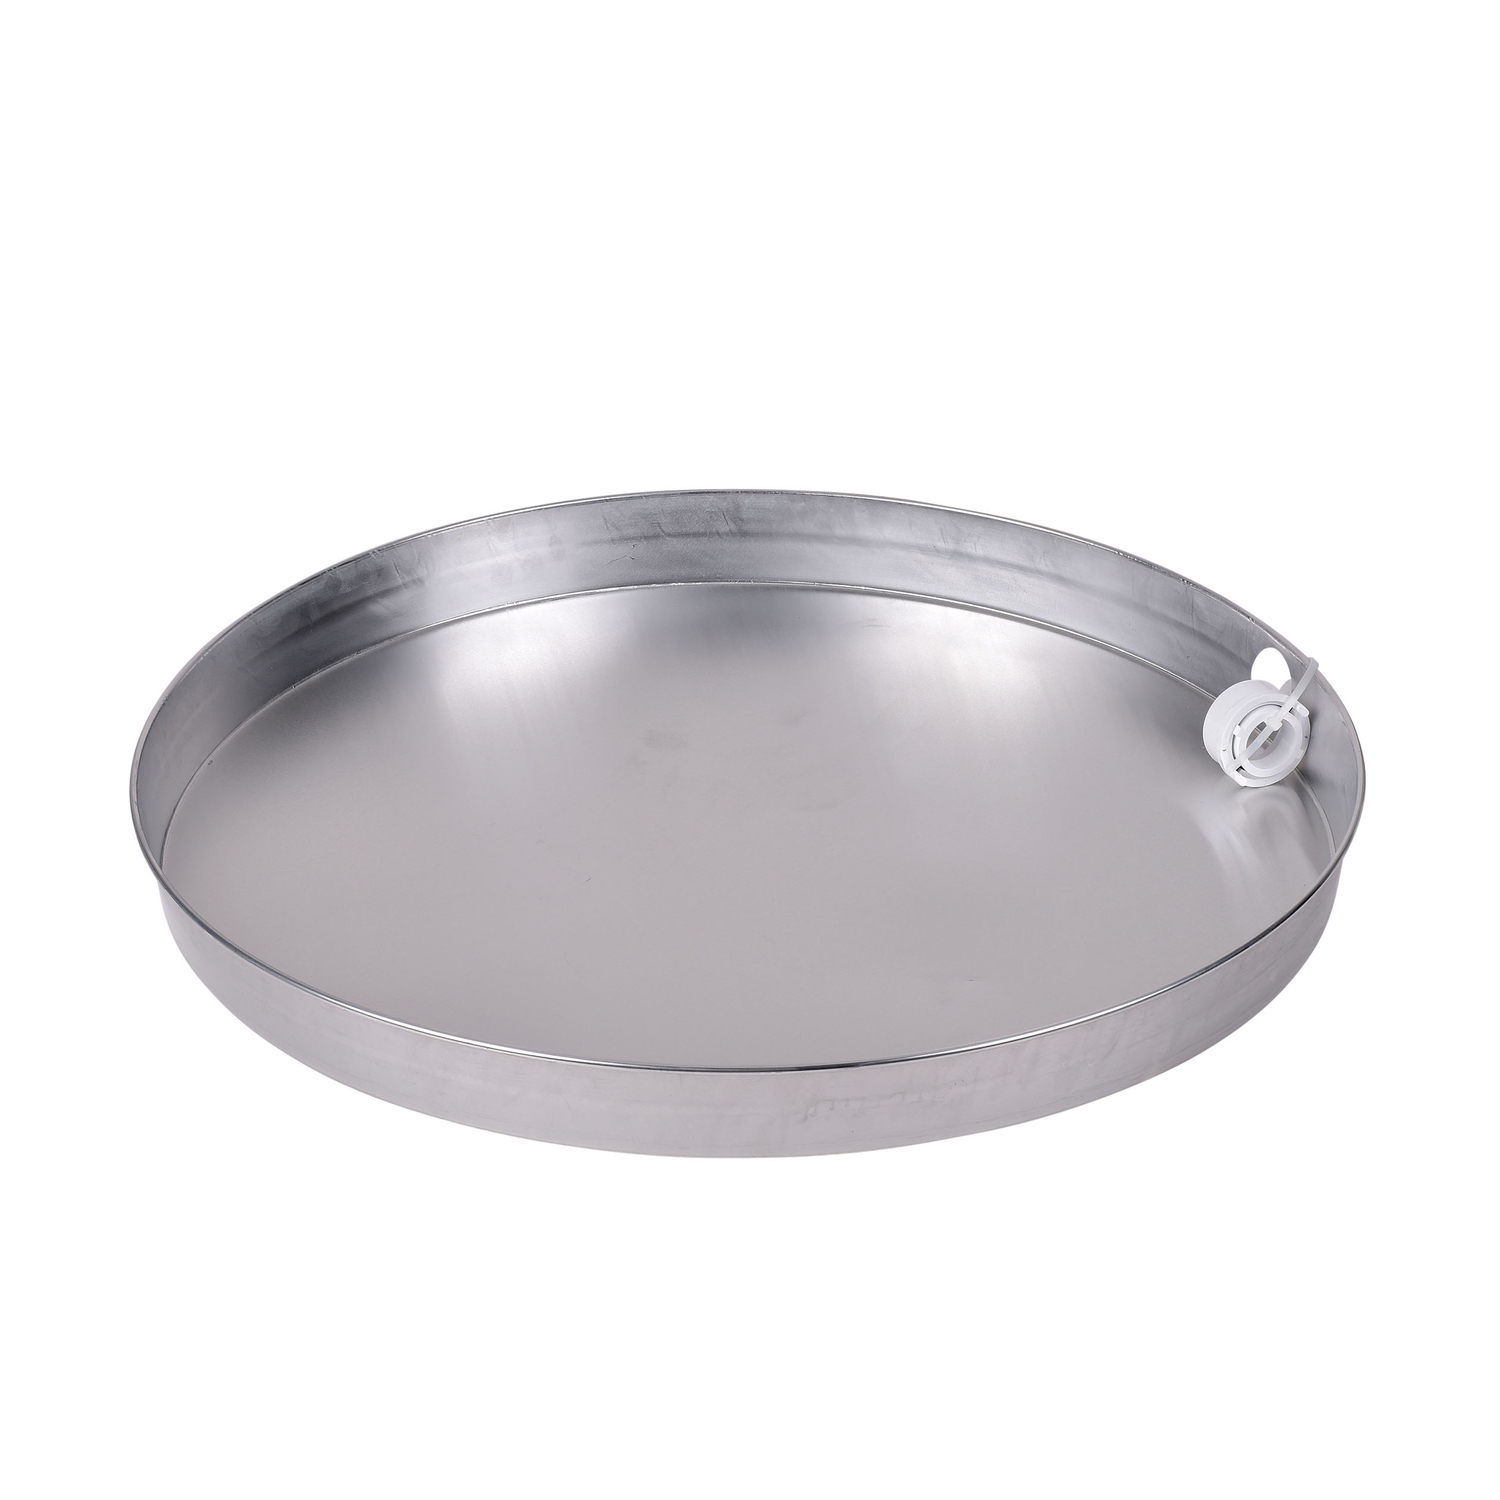 UPC 038753341514 product image for Oatey Aluminum Water Heater Pan | upcitemdb.com